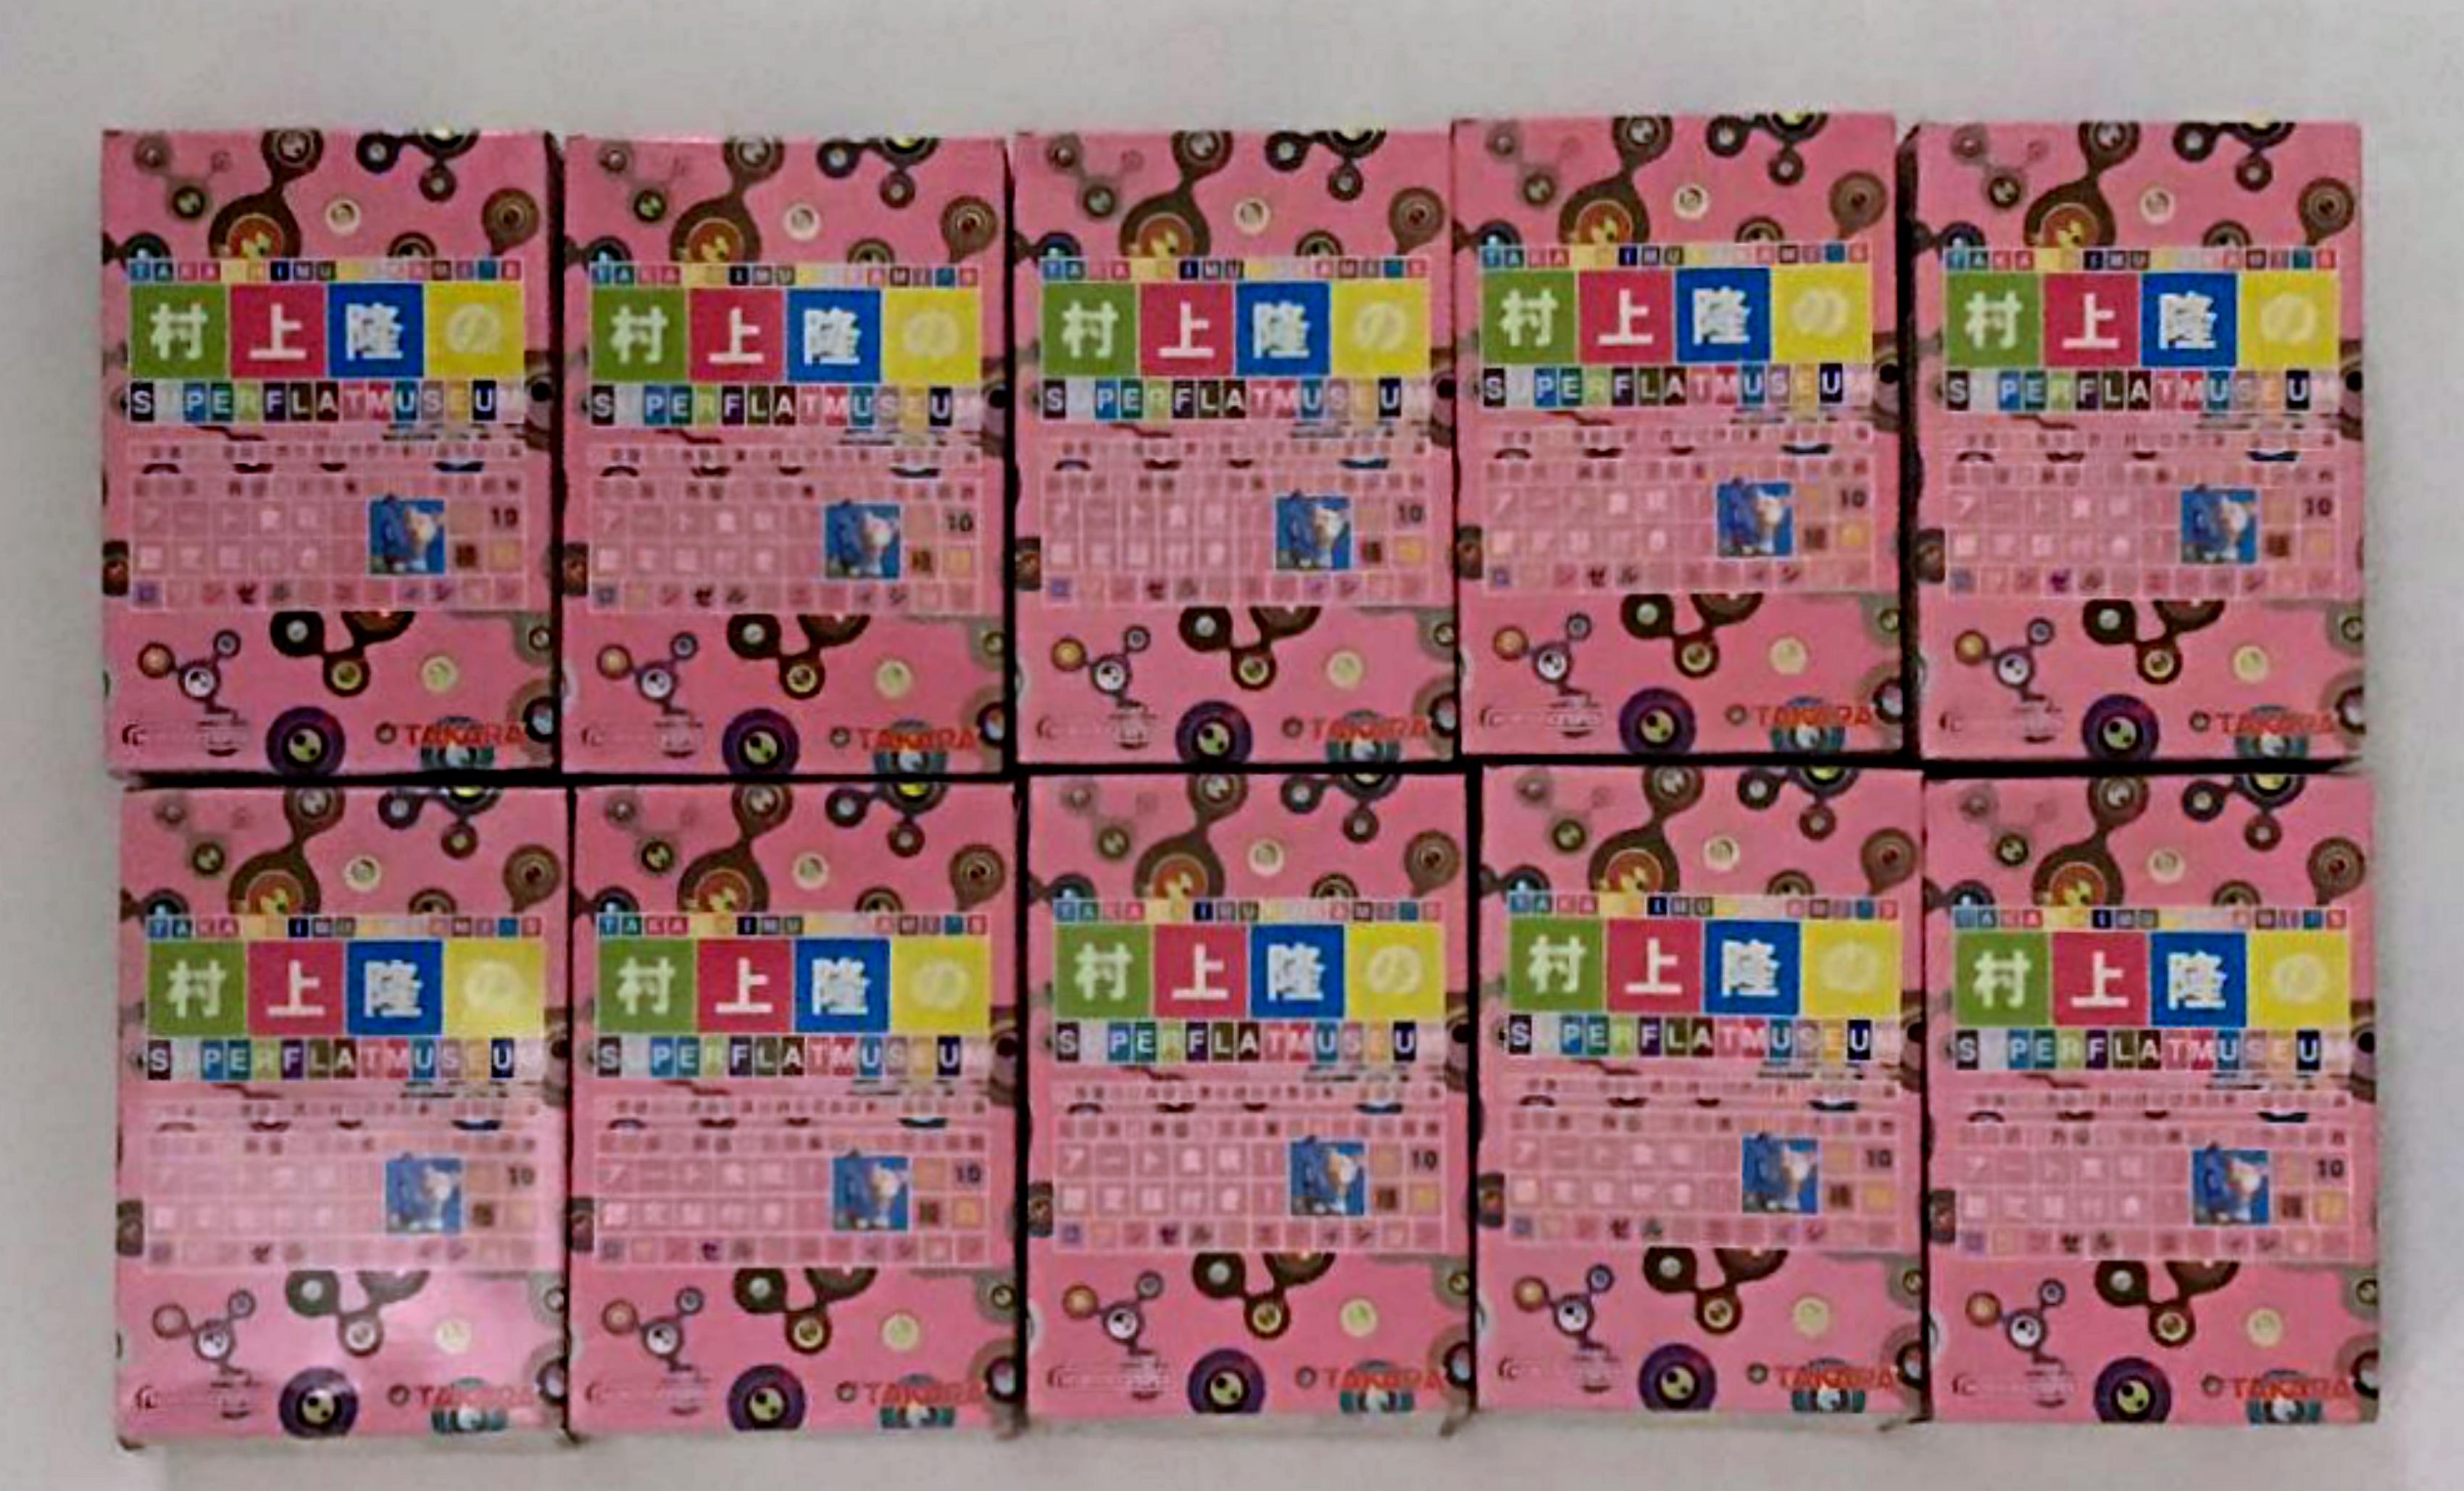 Super Flat Museum Toys (Ten Separate Works in Pink Boxes)